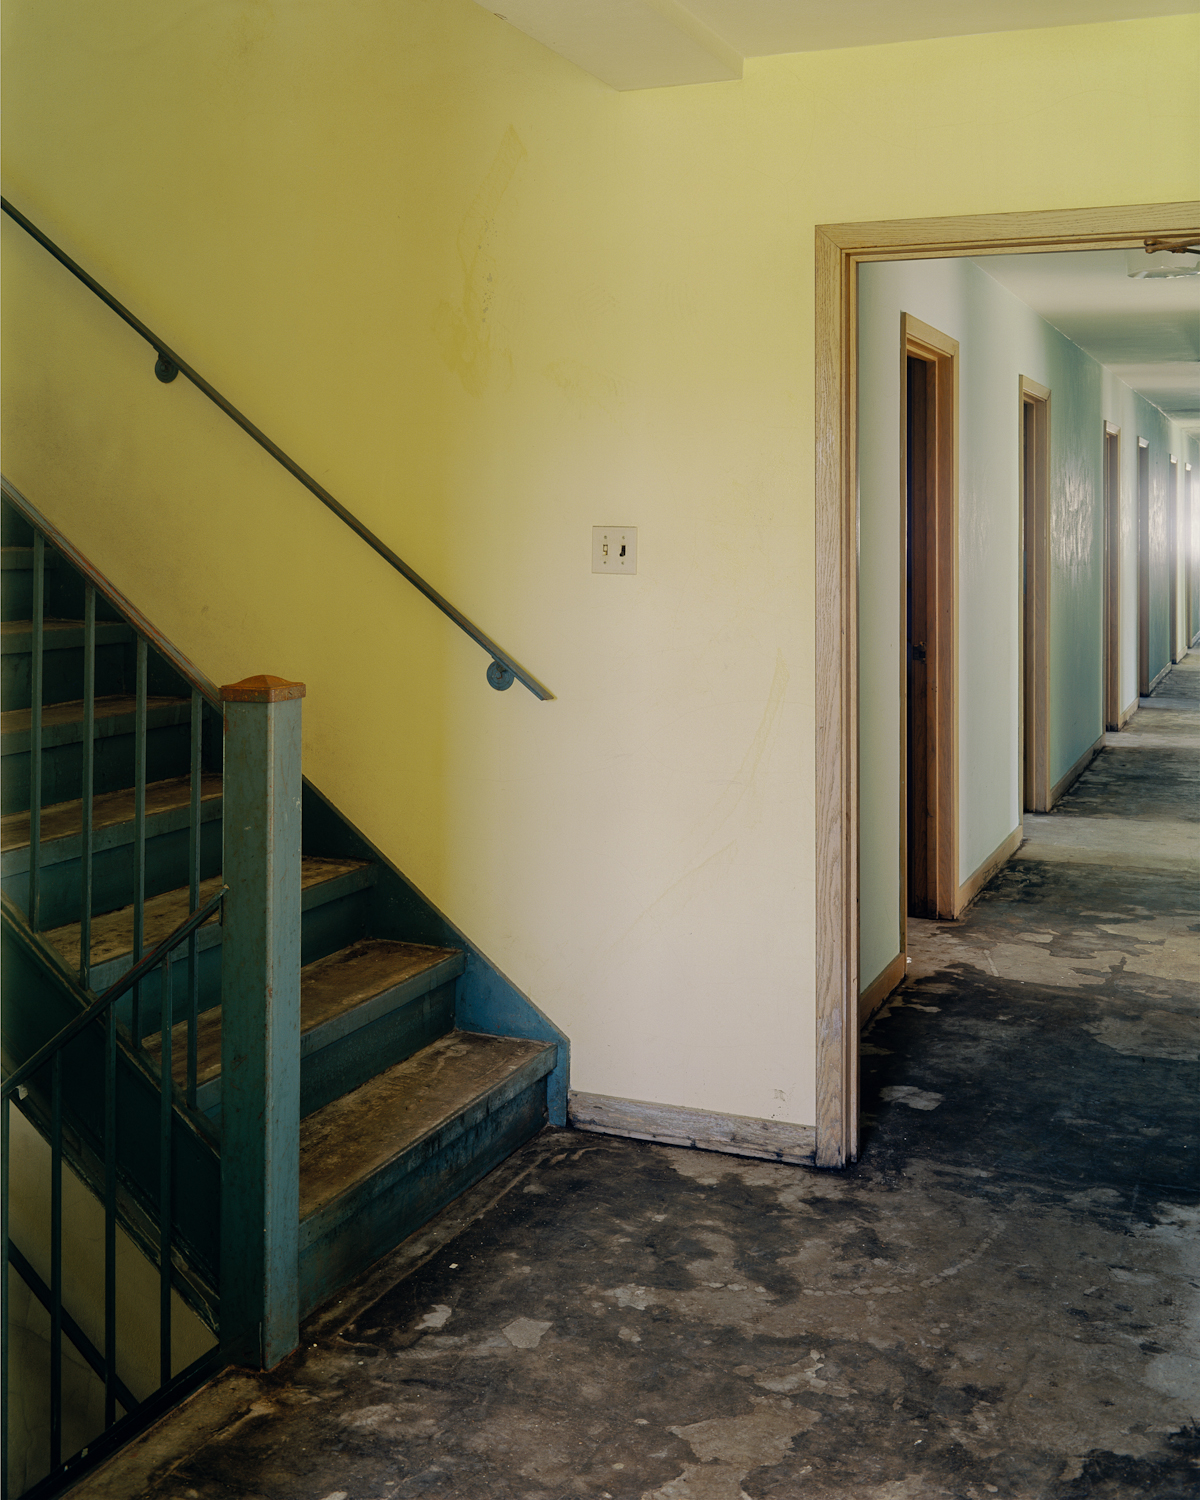 Stairwell and hallway, Dormitory Building.